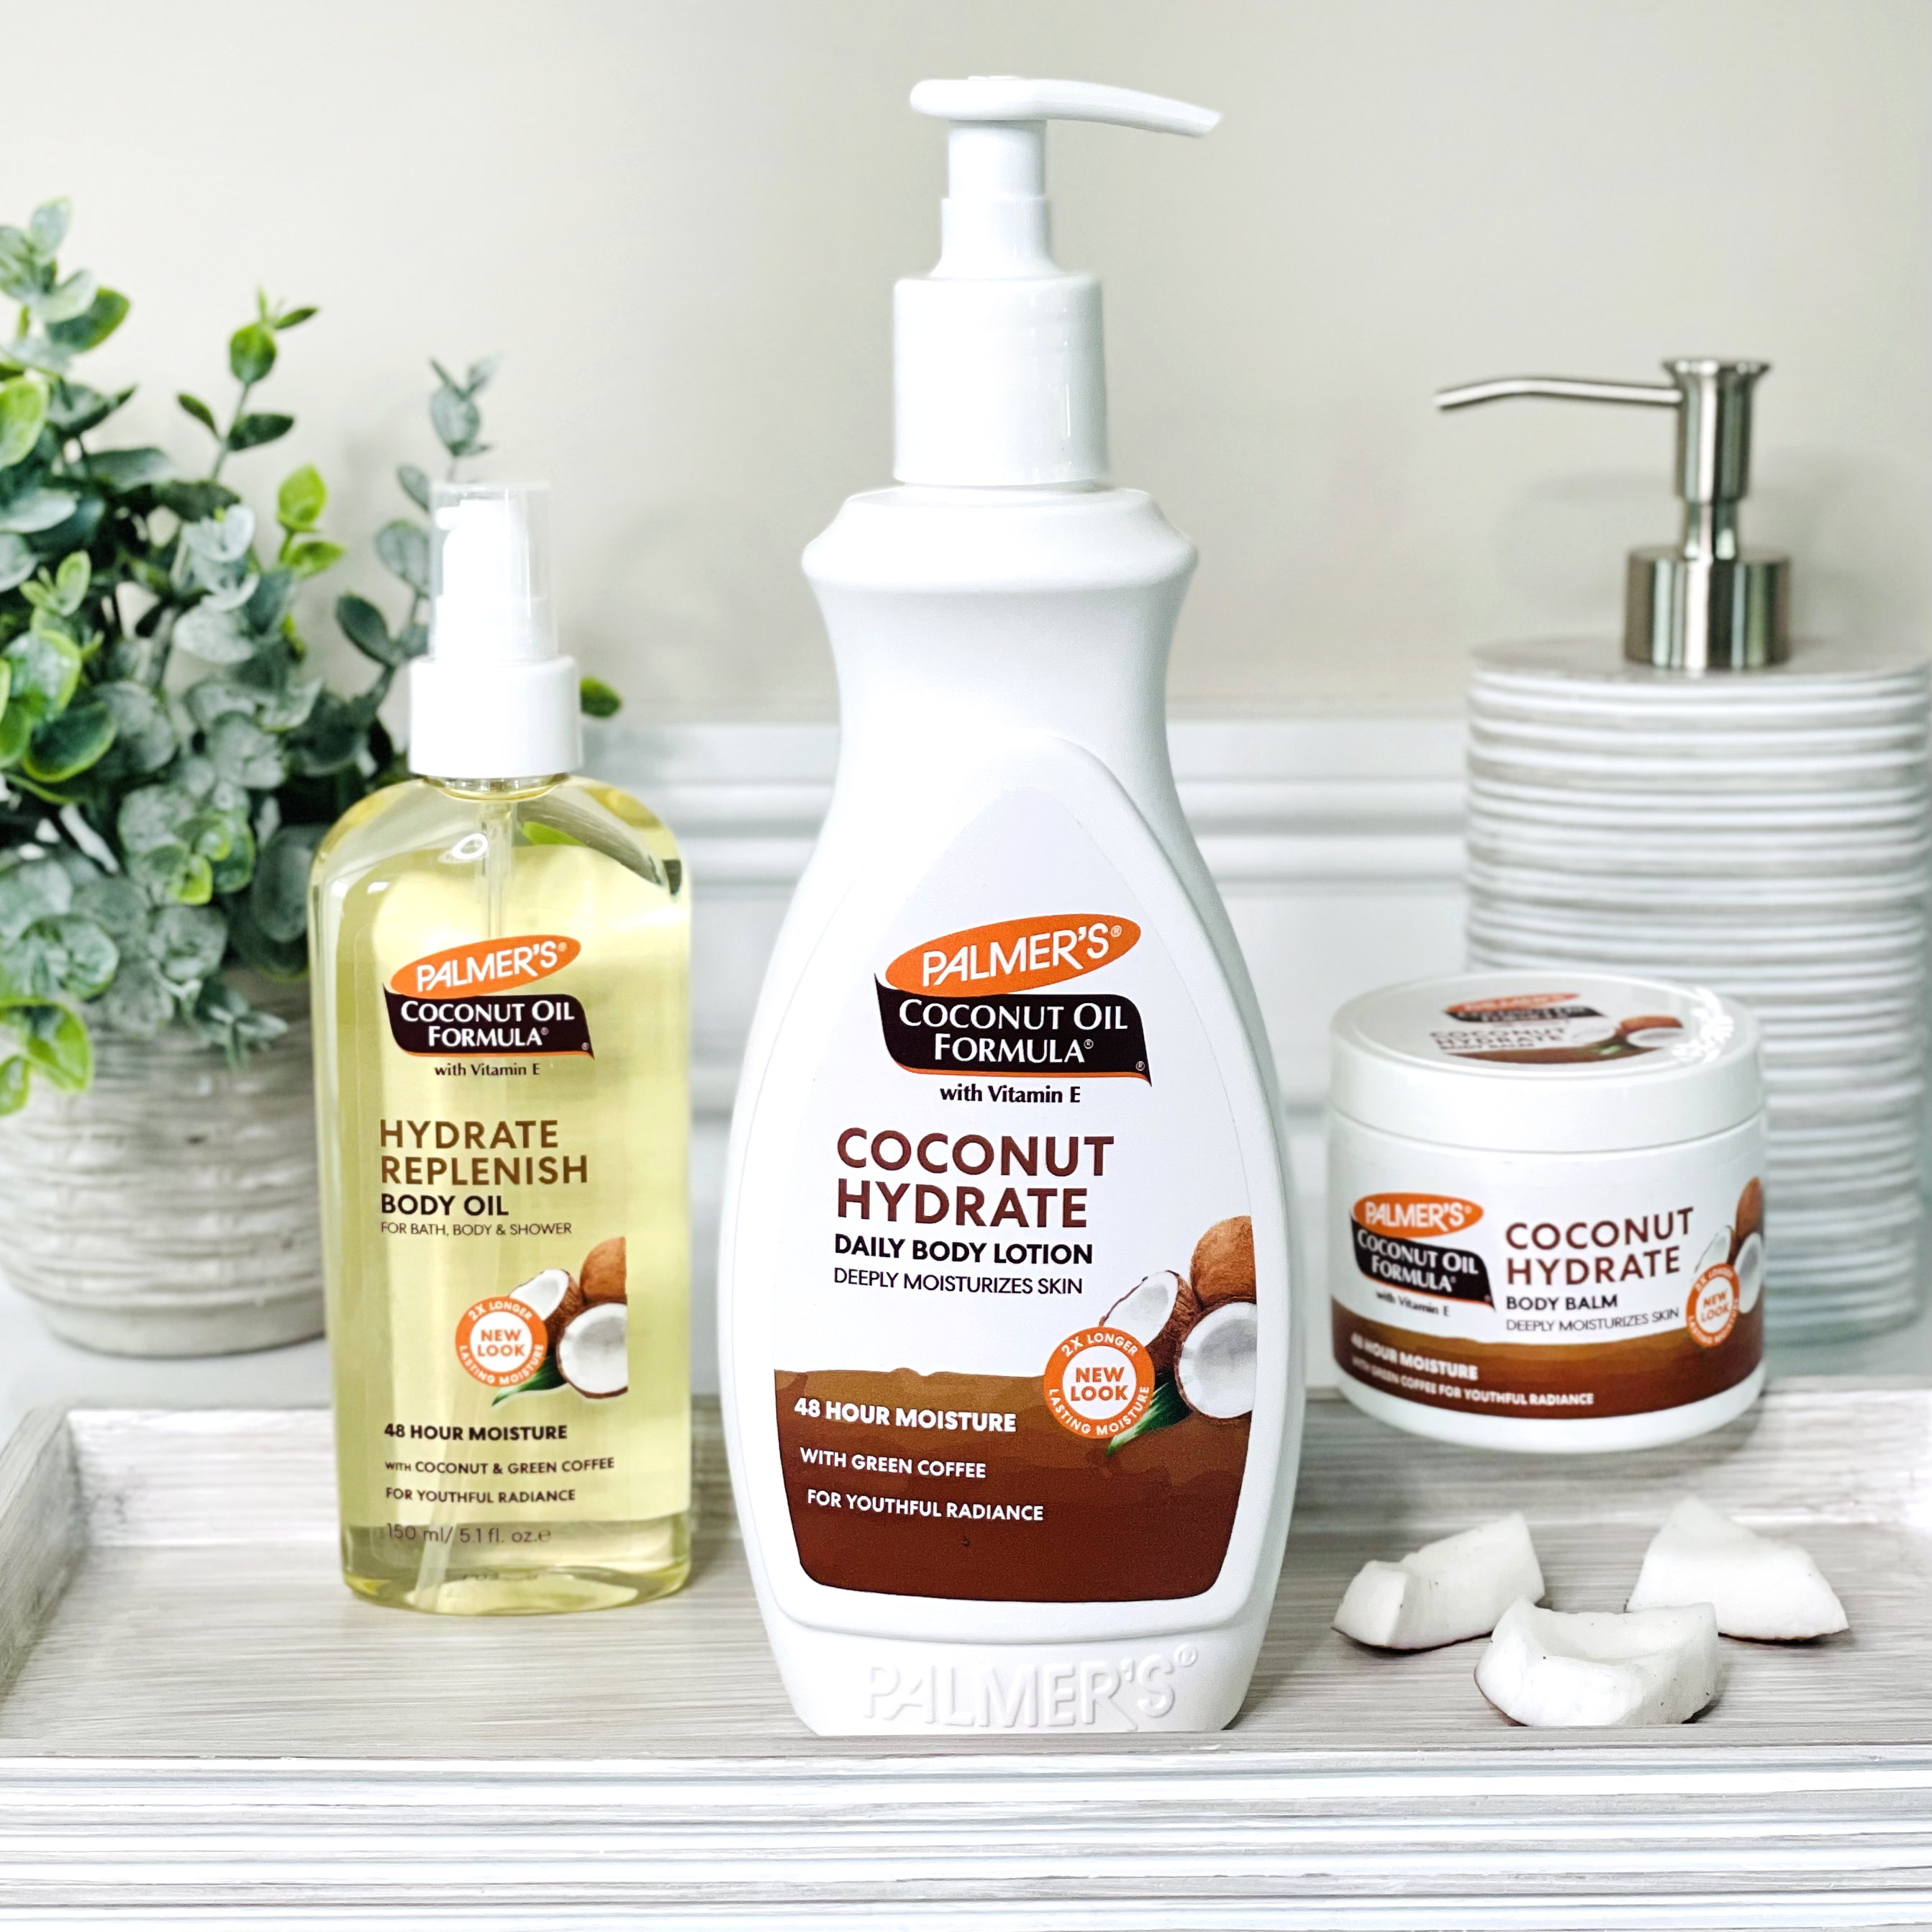 Palmer's Coconut Oil Formula Body Oil, Lotion and Balm for your dry skin winter skincare routine